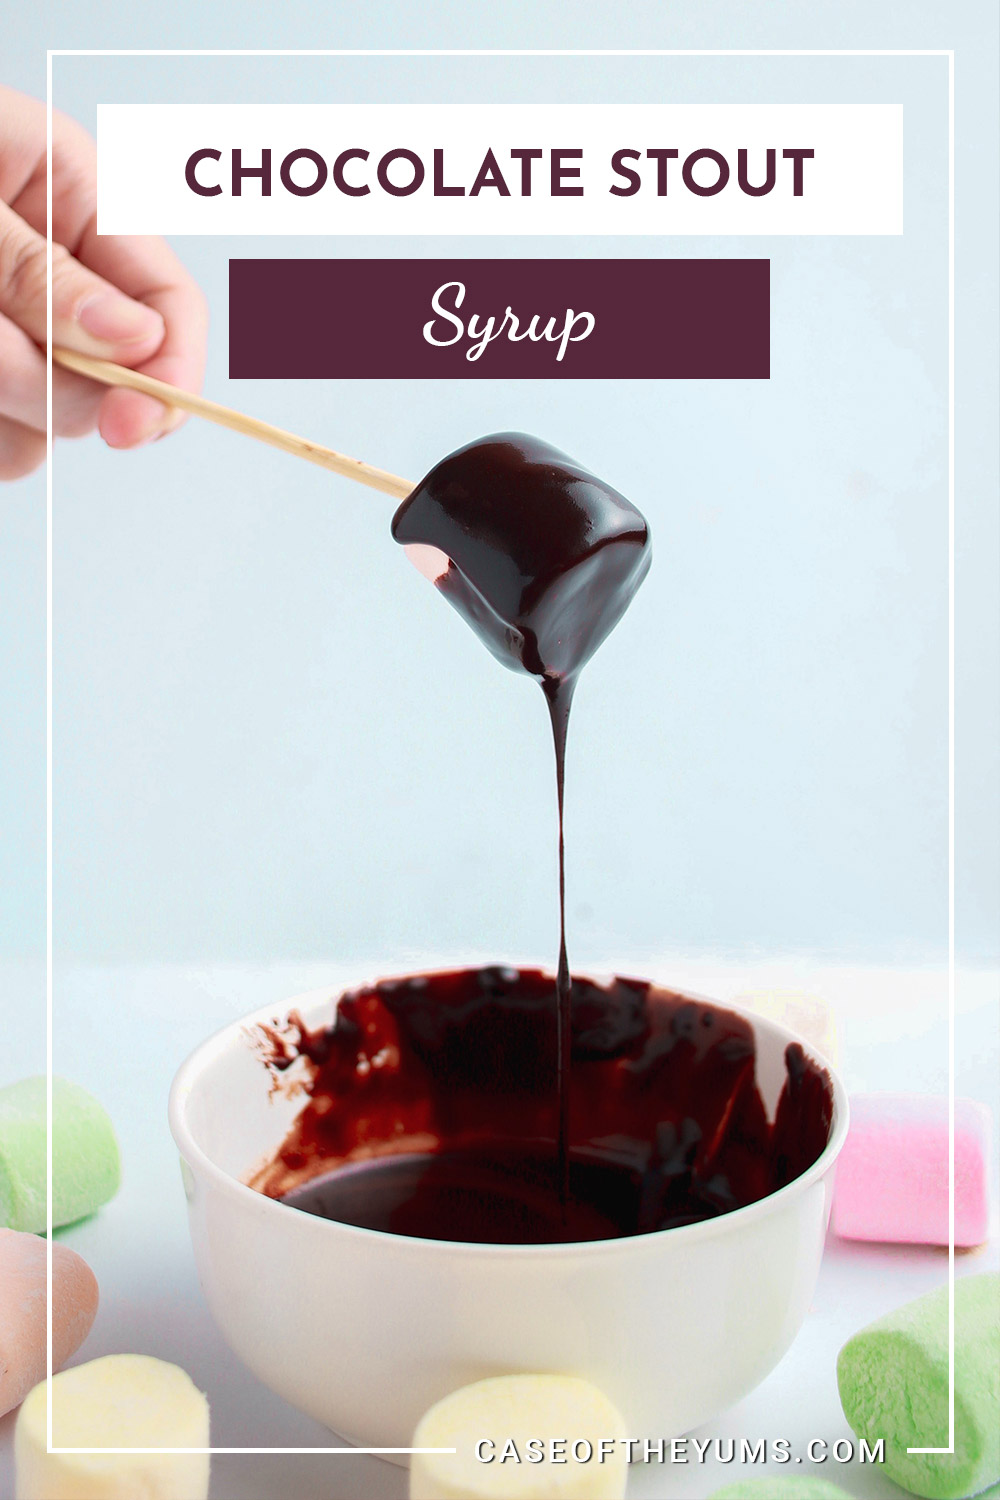 Marshmallow dipped in chocolate syrup = Chocolate Stout Syrup - Chocolate Stout Syrup